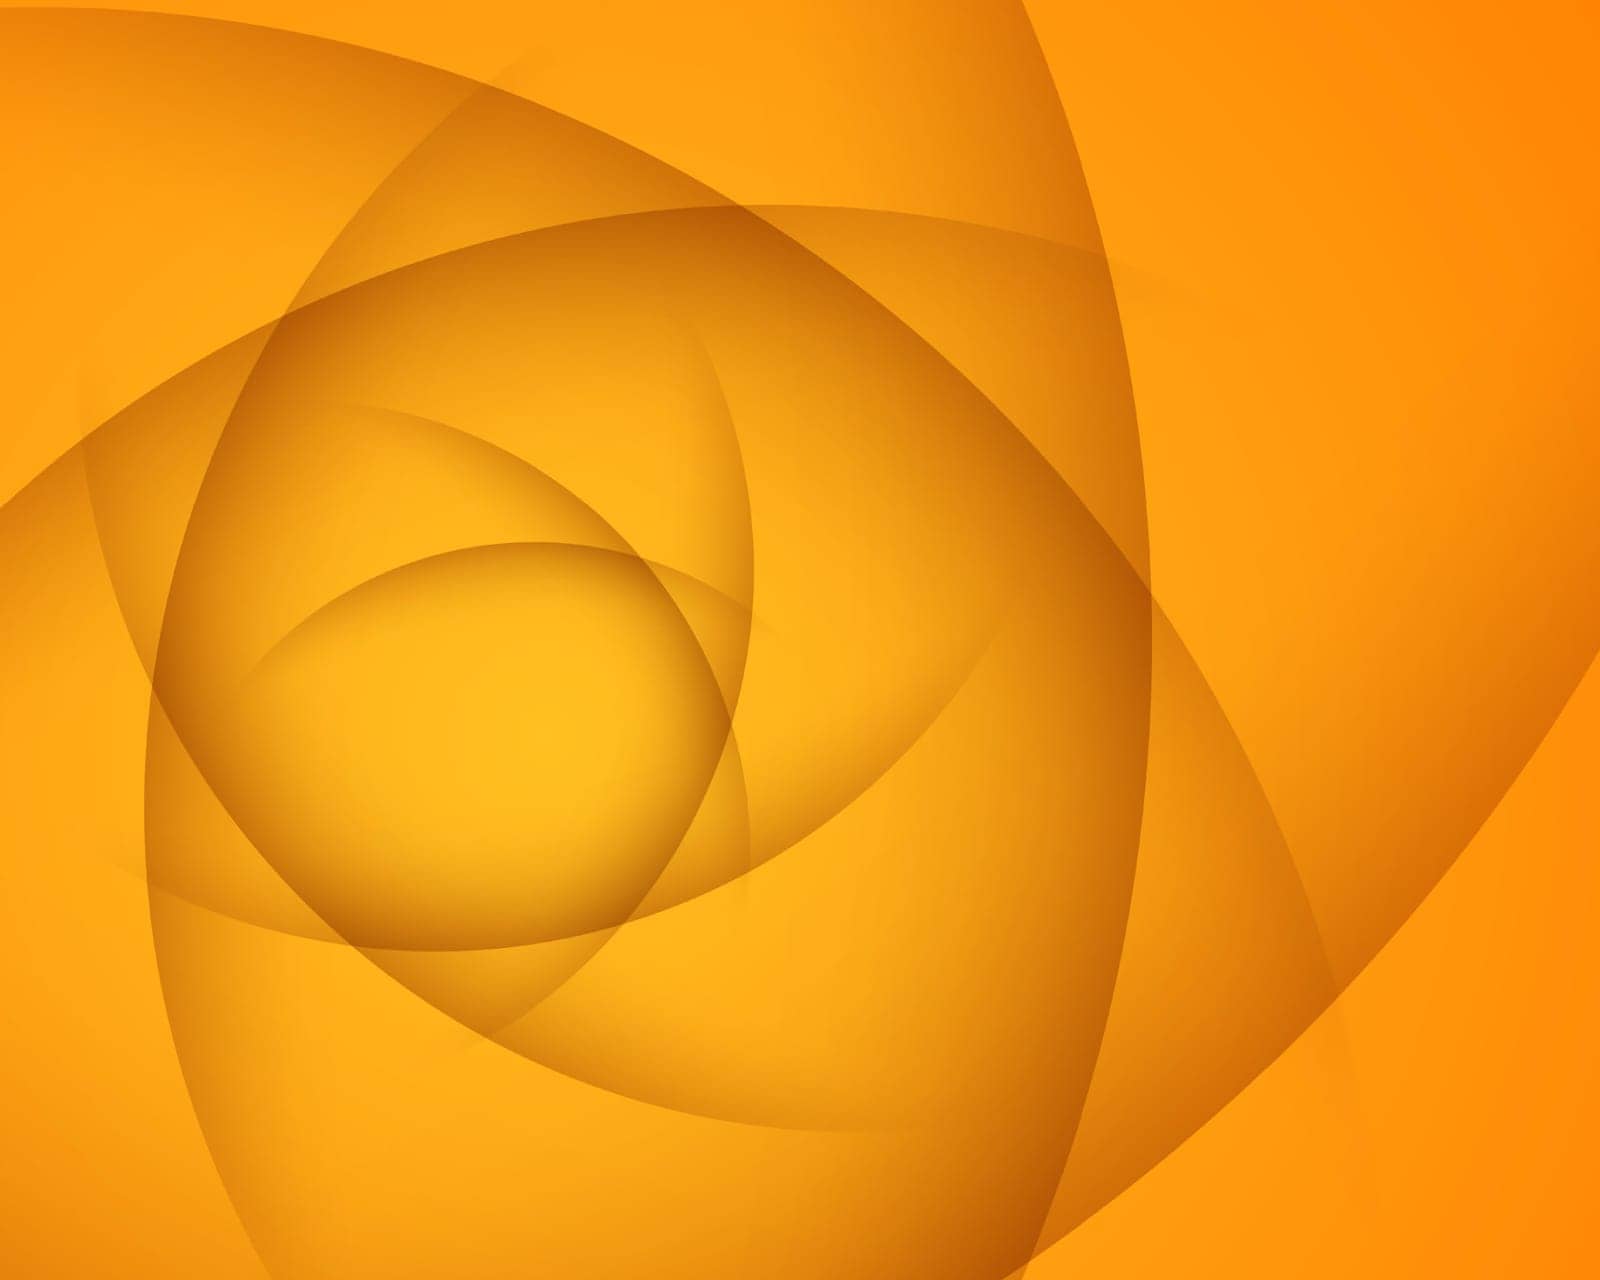 Warm Orange Abstract Background With Overlapping Circles by ProVectors